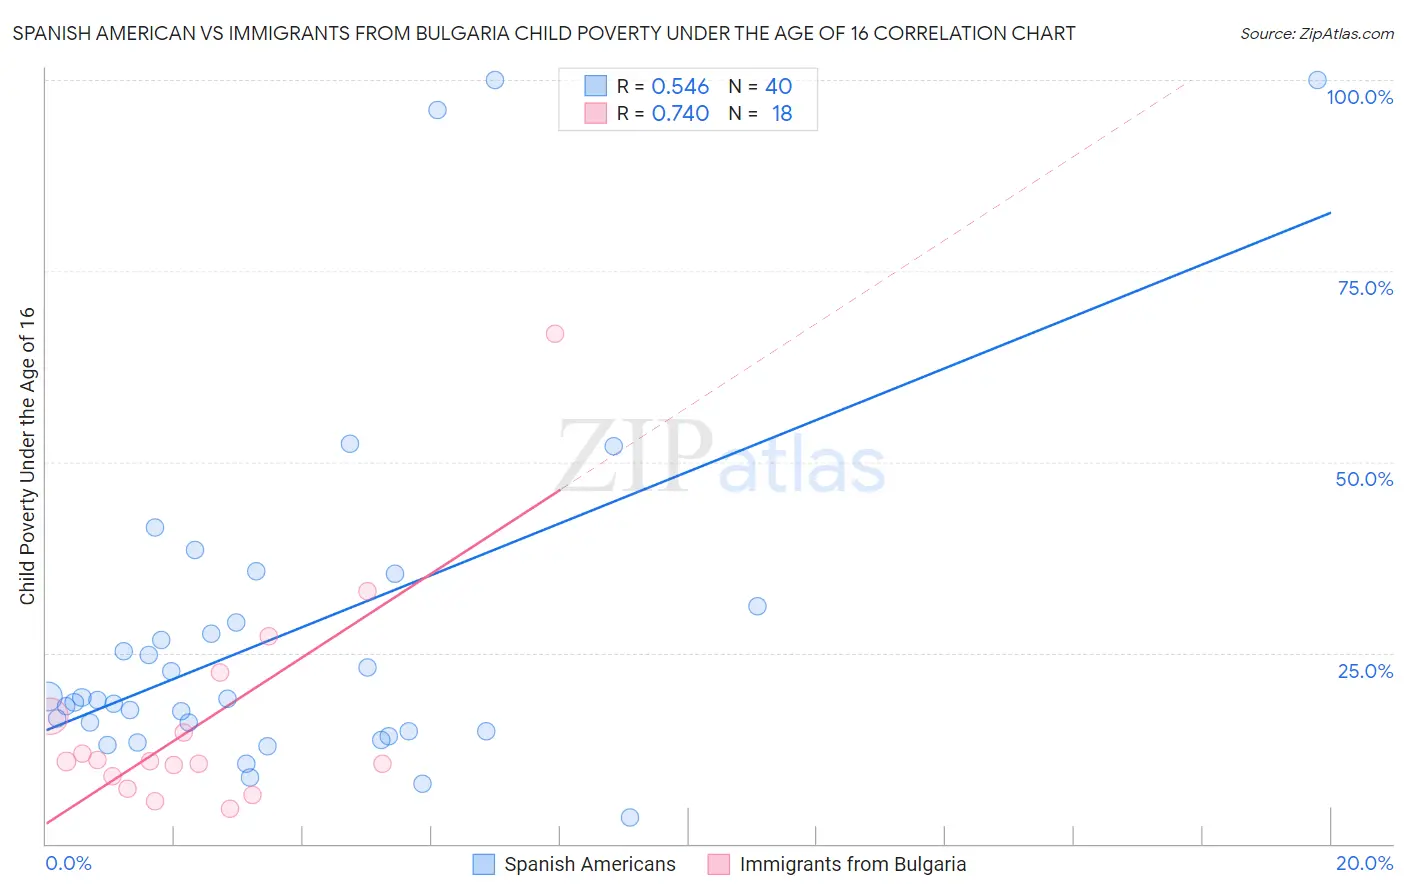 Spanish American vs Immigrants from Bulgaria Child Poverty Under the Age of 16